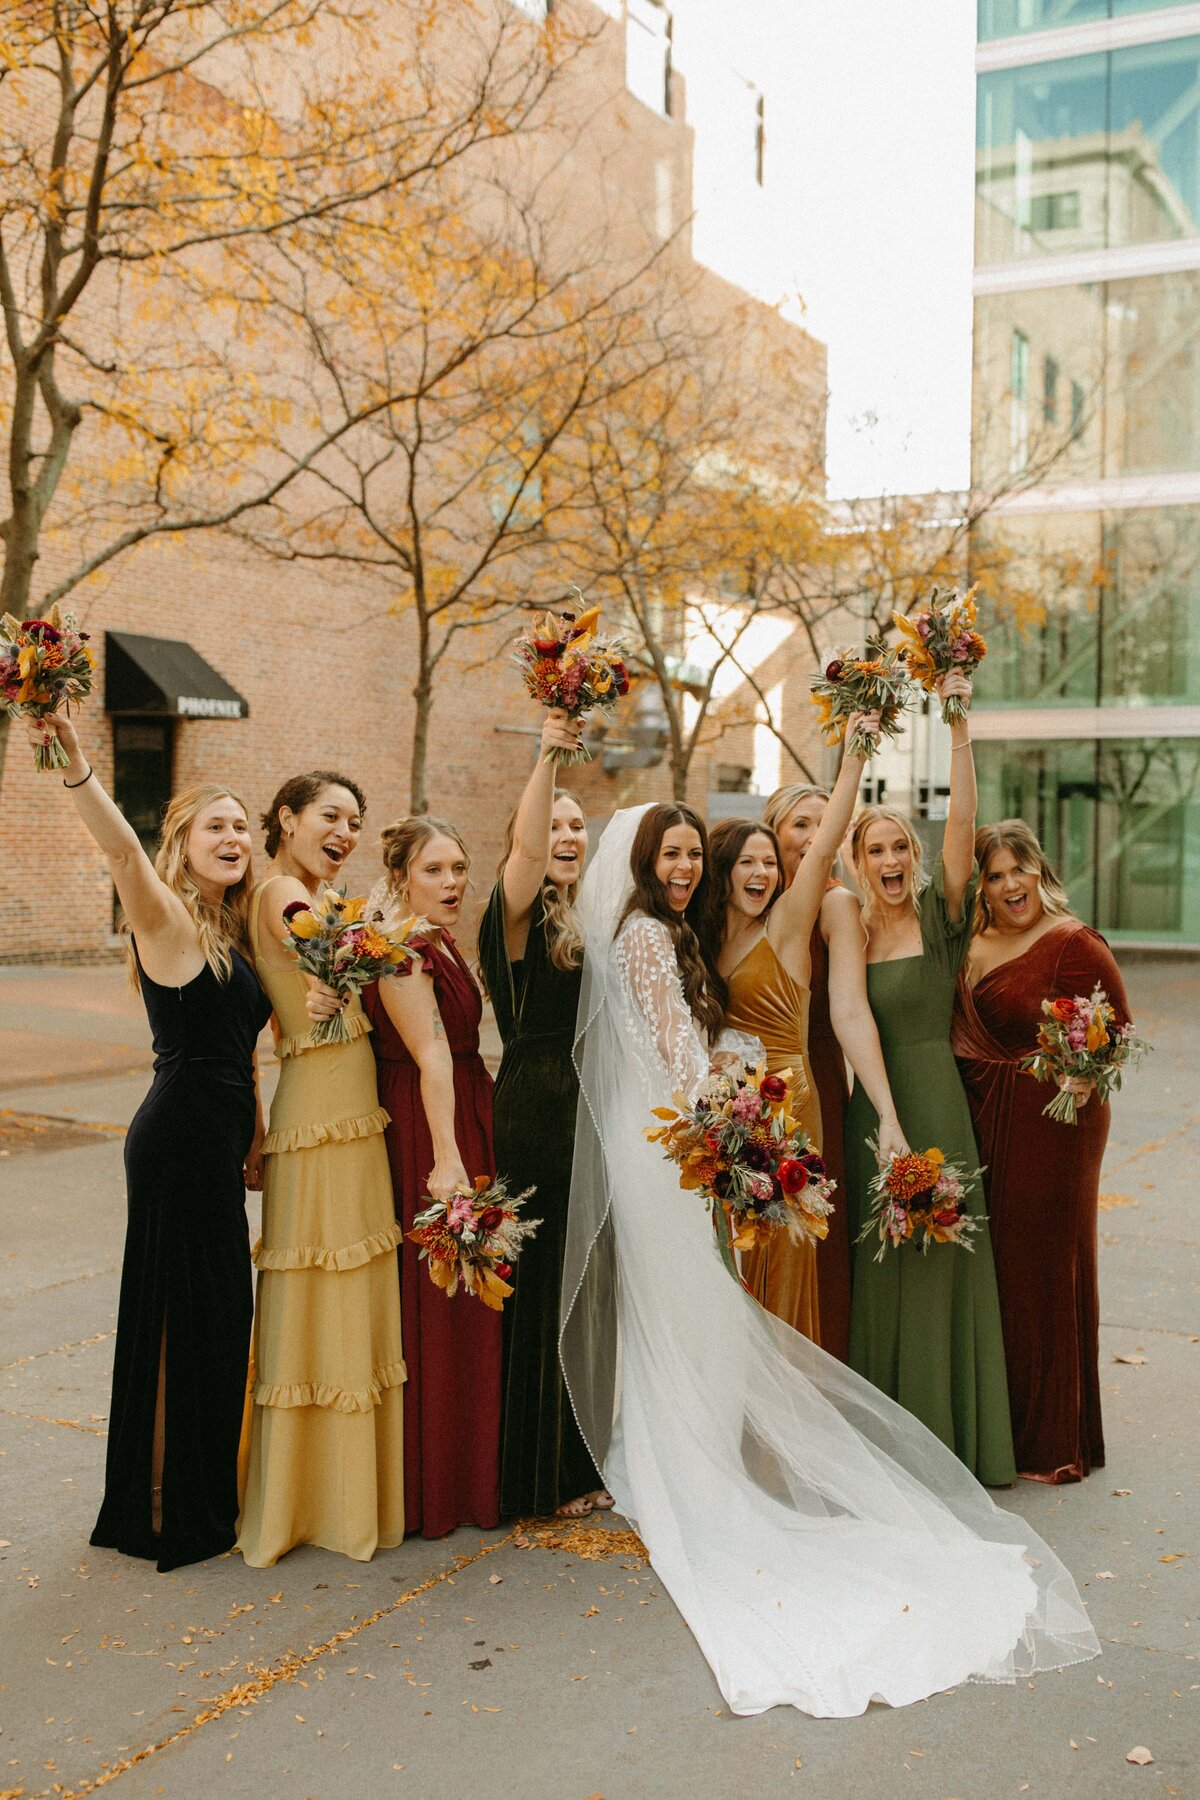 Bride and bridesmaids in colorful dresses celebrating with raised bouquets on a city street in Davenport, exhibiting joyful expressions.